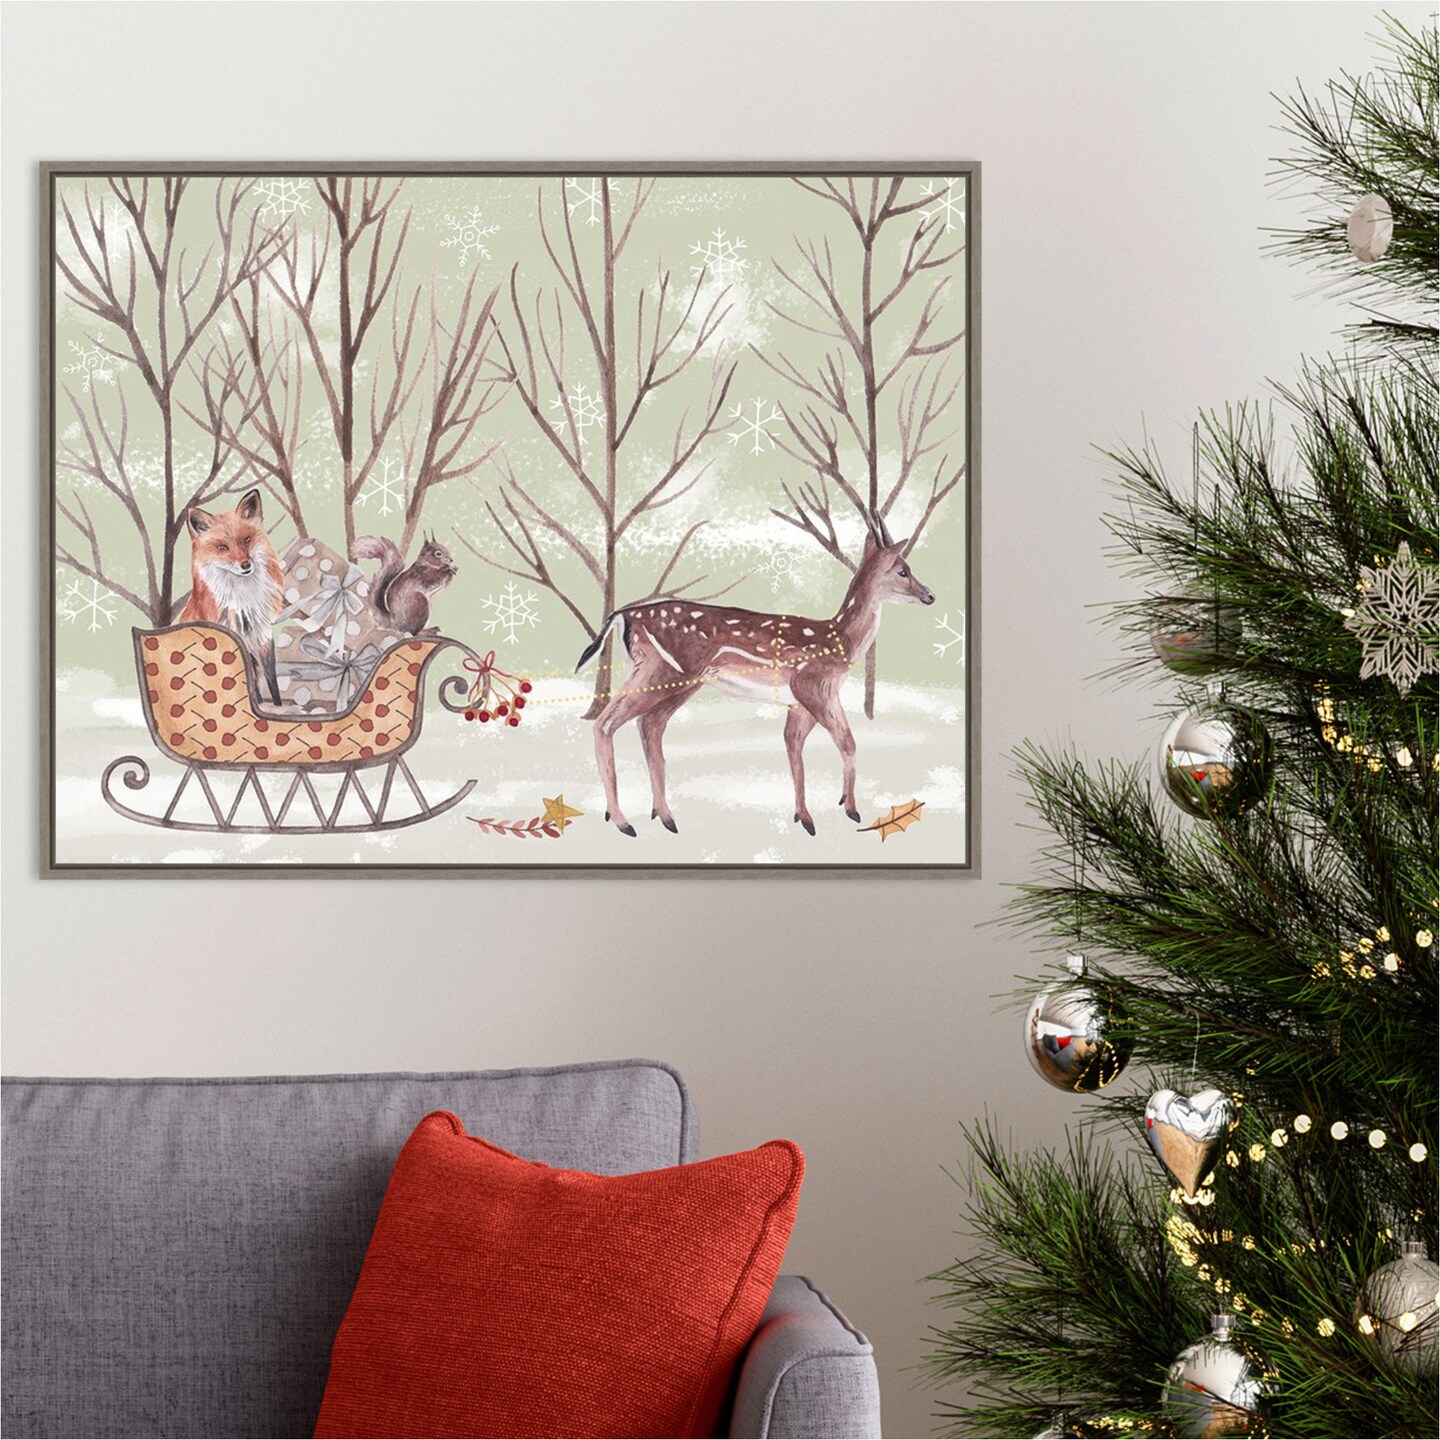 Christmas Time I by Melissa Wang 30-in. W x 23-in. H. Canvas Wall Art Print Framed in Grey